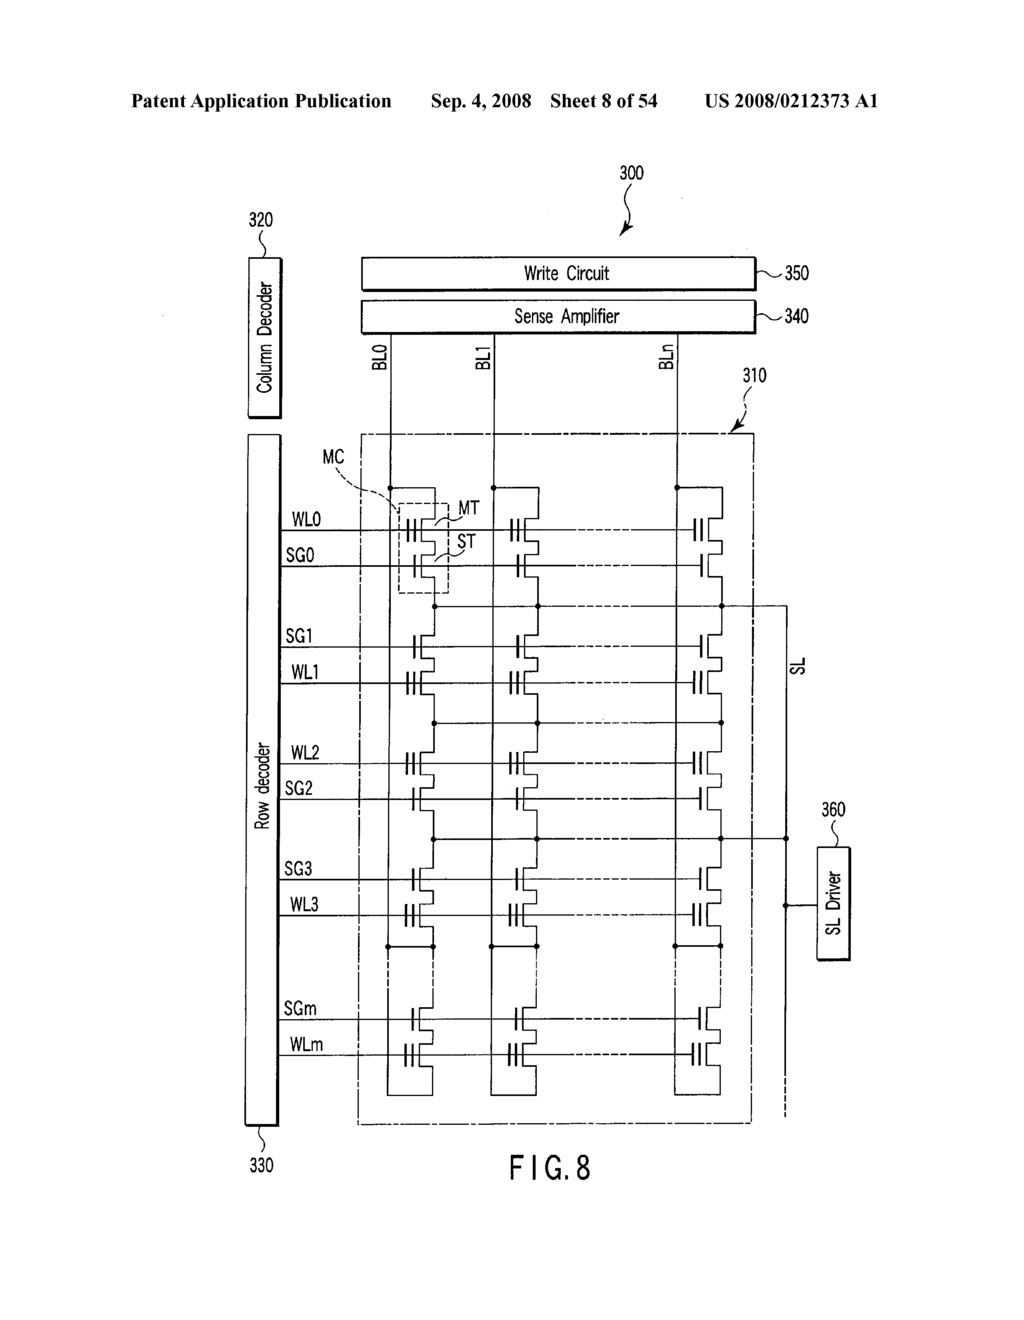 SEMICONDUCTOR INTEGRATED CIRCUIT DEVICE WITH A STACKED GATE INCLUDING A FLOATING GATE AND A CONTROL GATE - diagram, schematic, and image 09